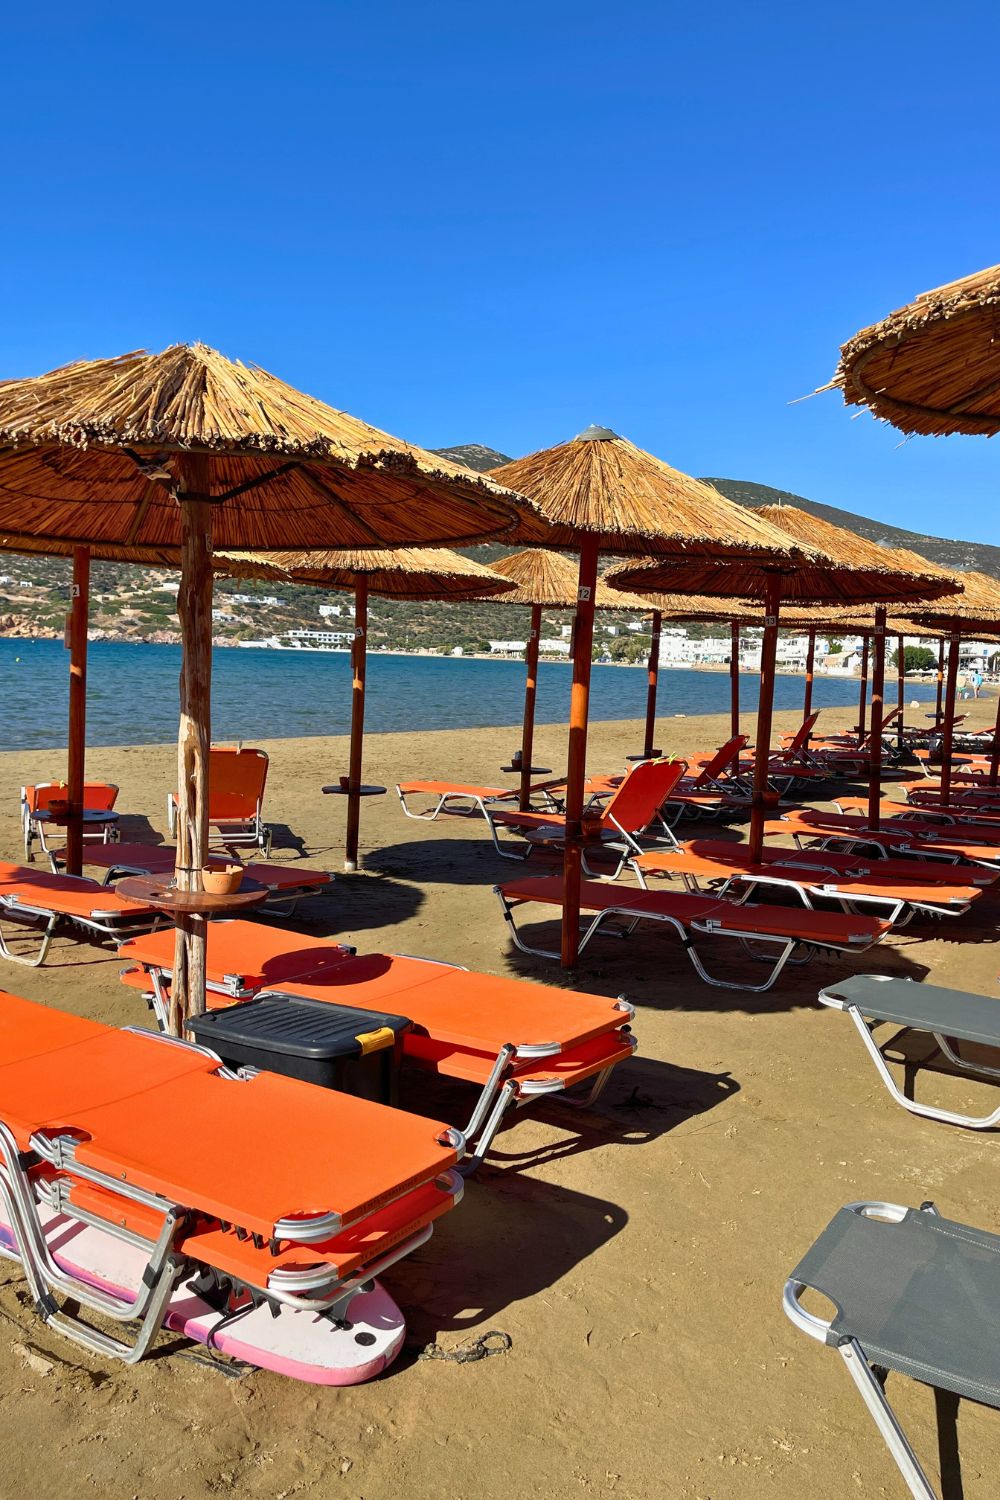 Bright orange beach loungers lined up under thatched parasols on a sandy beach in Sifnos, with the calm Aegean Sea in the background.